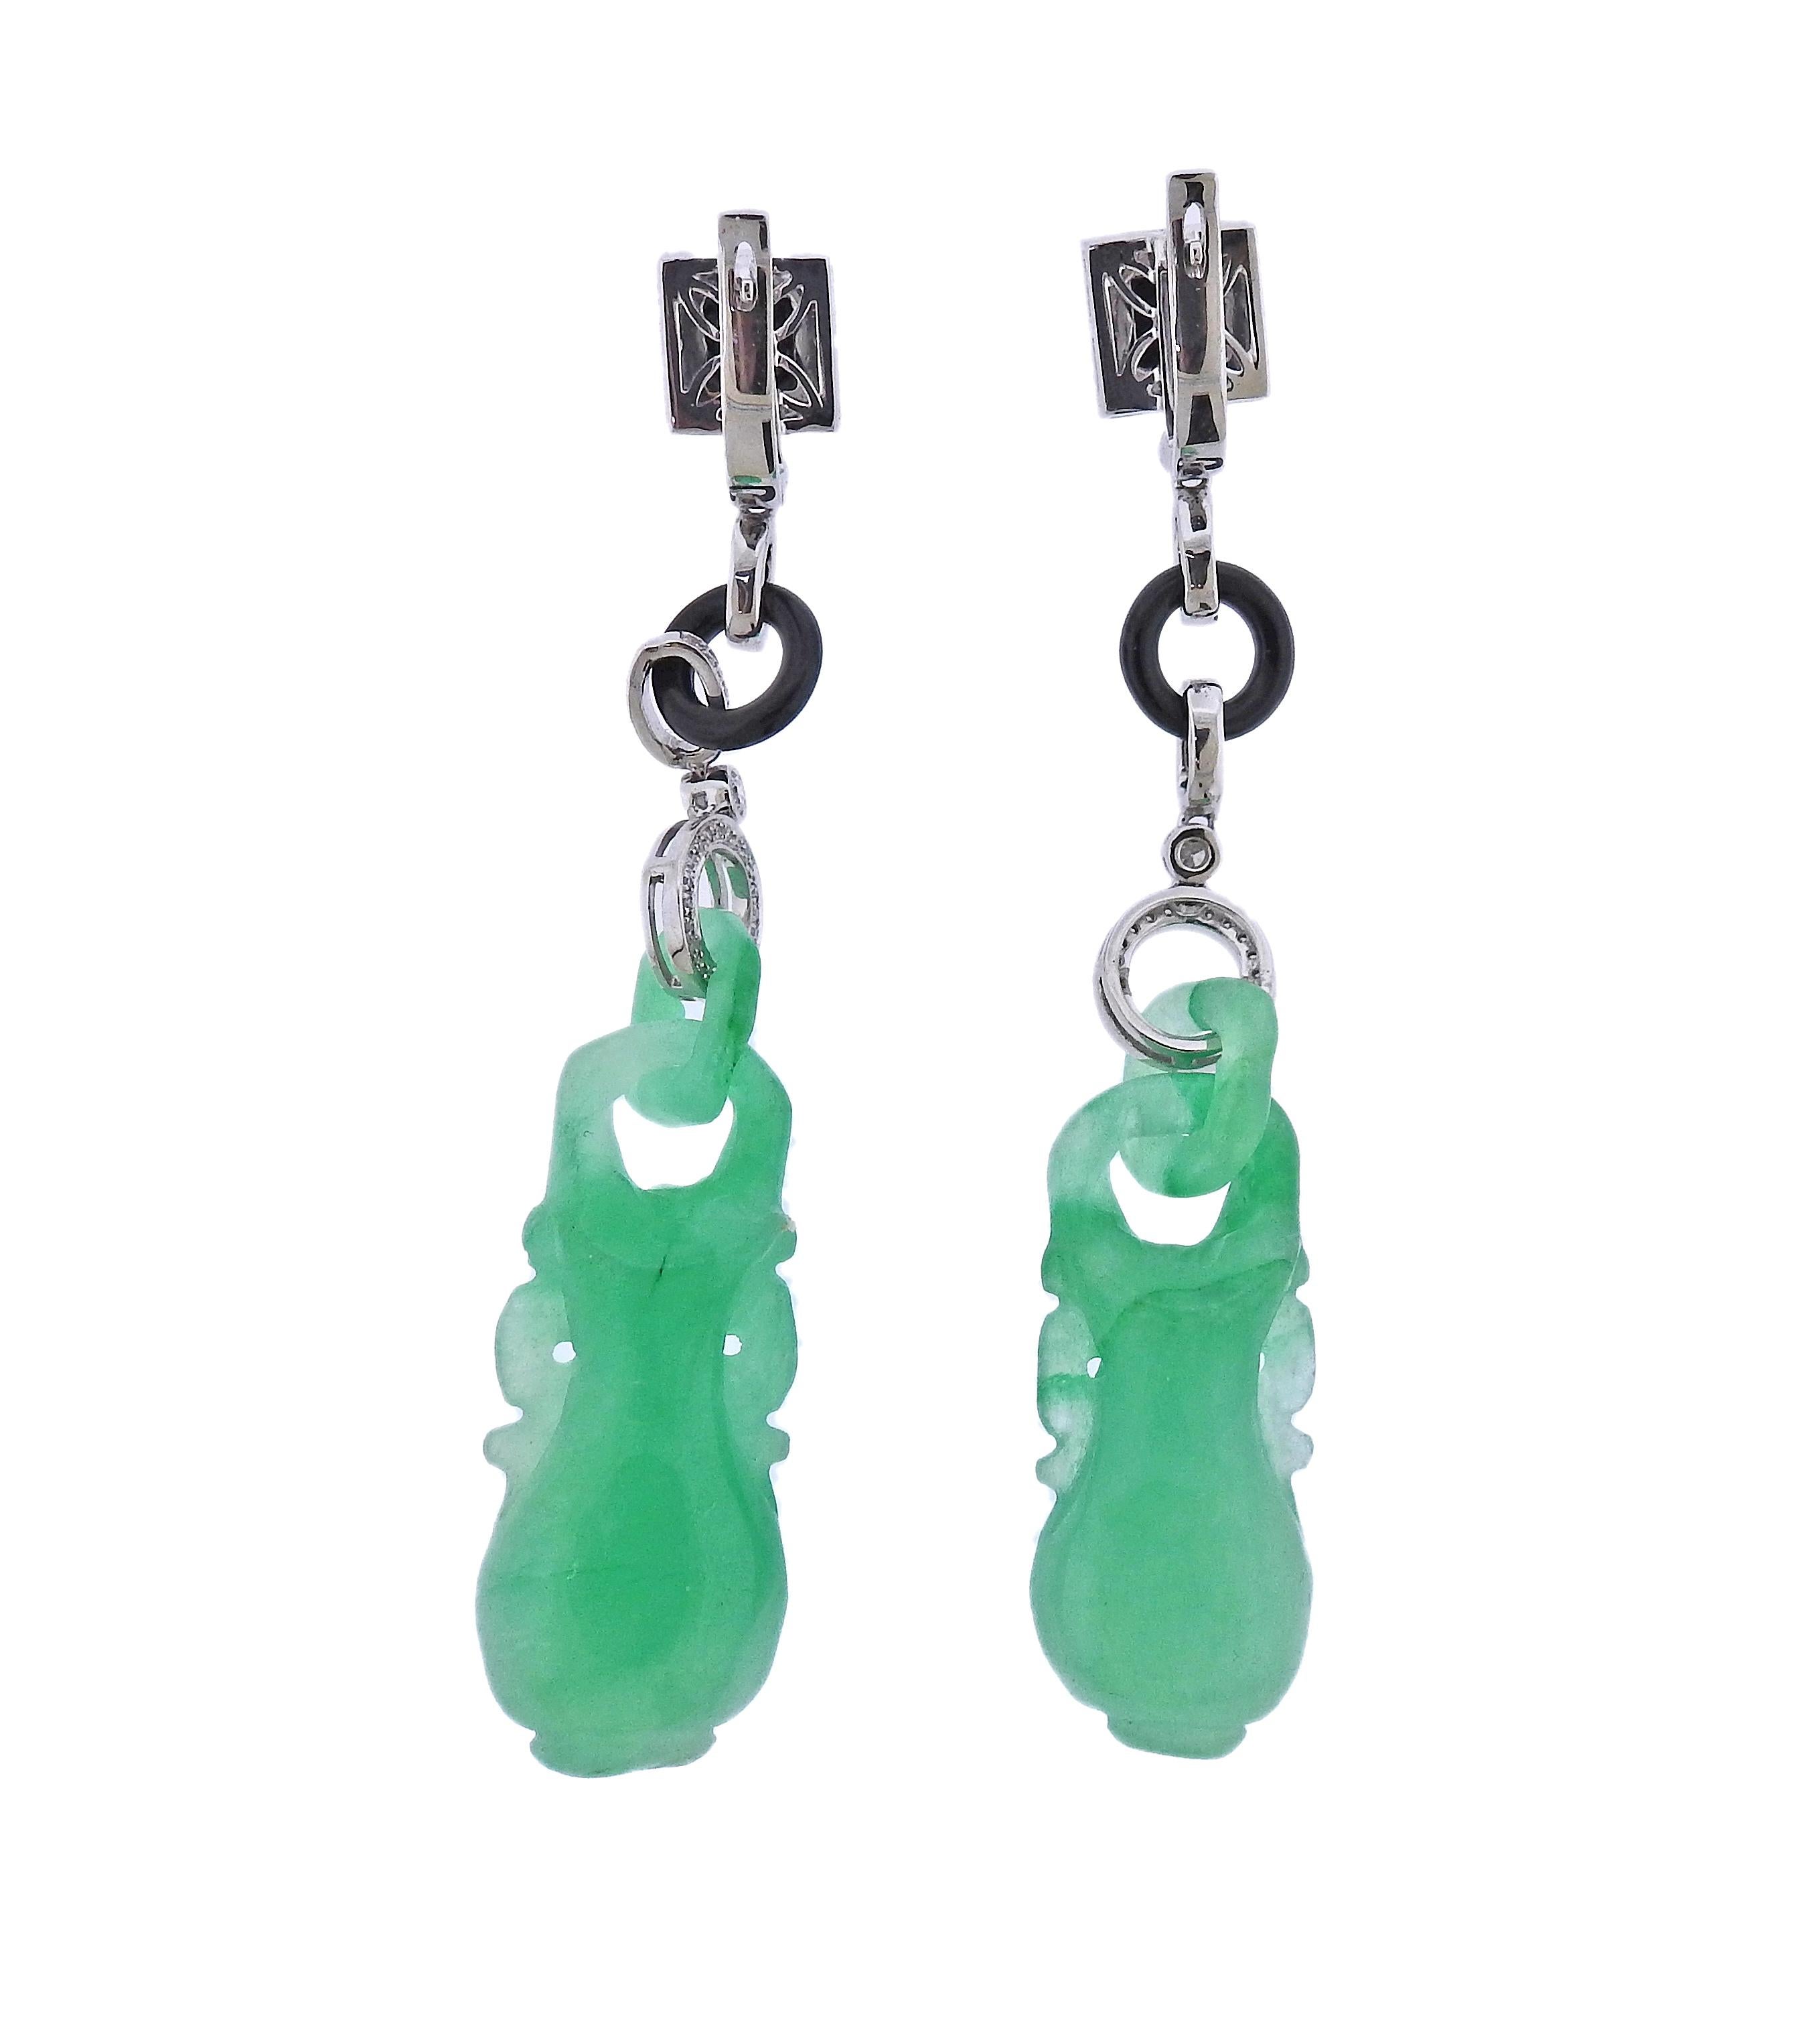 Pair of 18k gold drop earrings, with carved 71.60ctw jadeite jade, onyx and 0.29ctw in diamonds. Earrings are 71mm long. Marked 750. Weight - 22.5 grams.